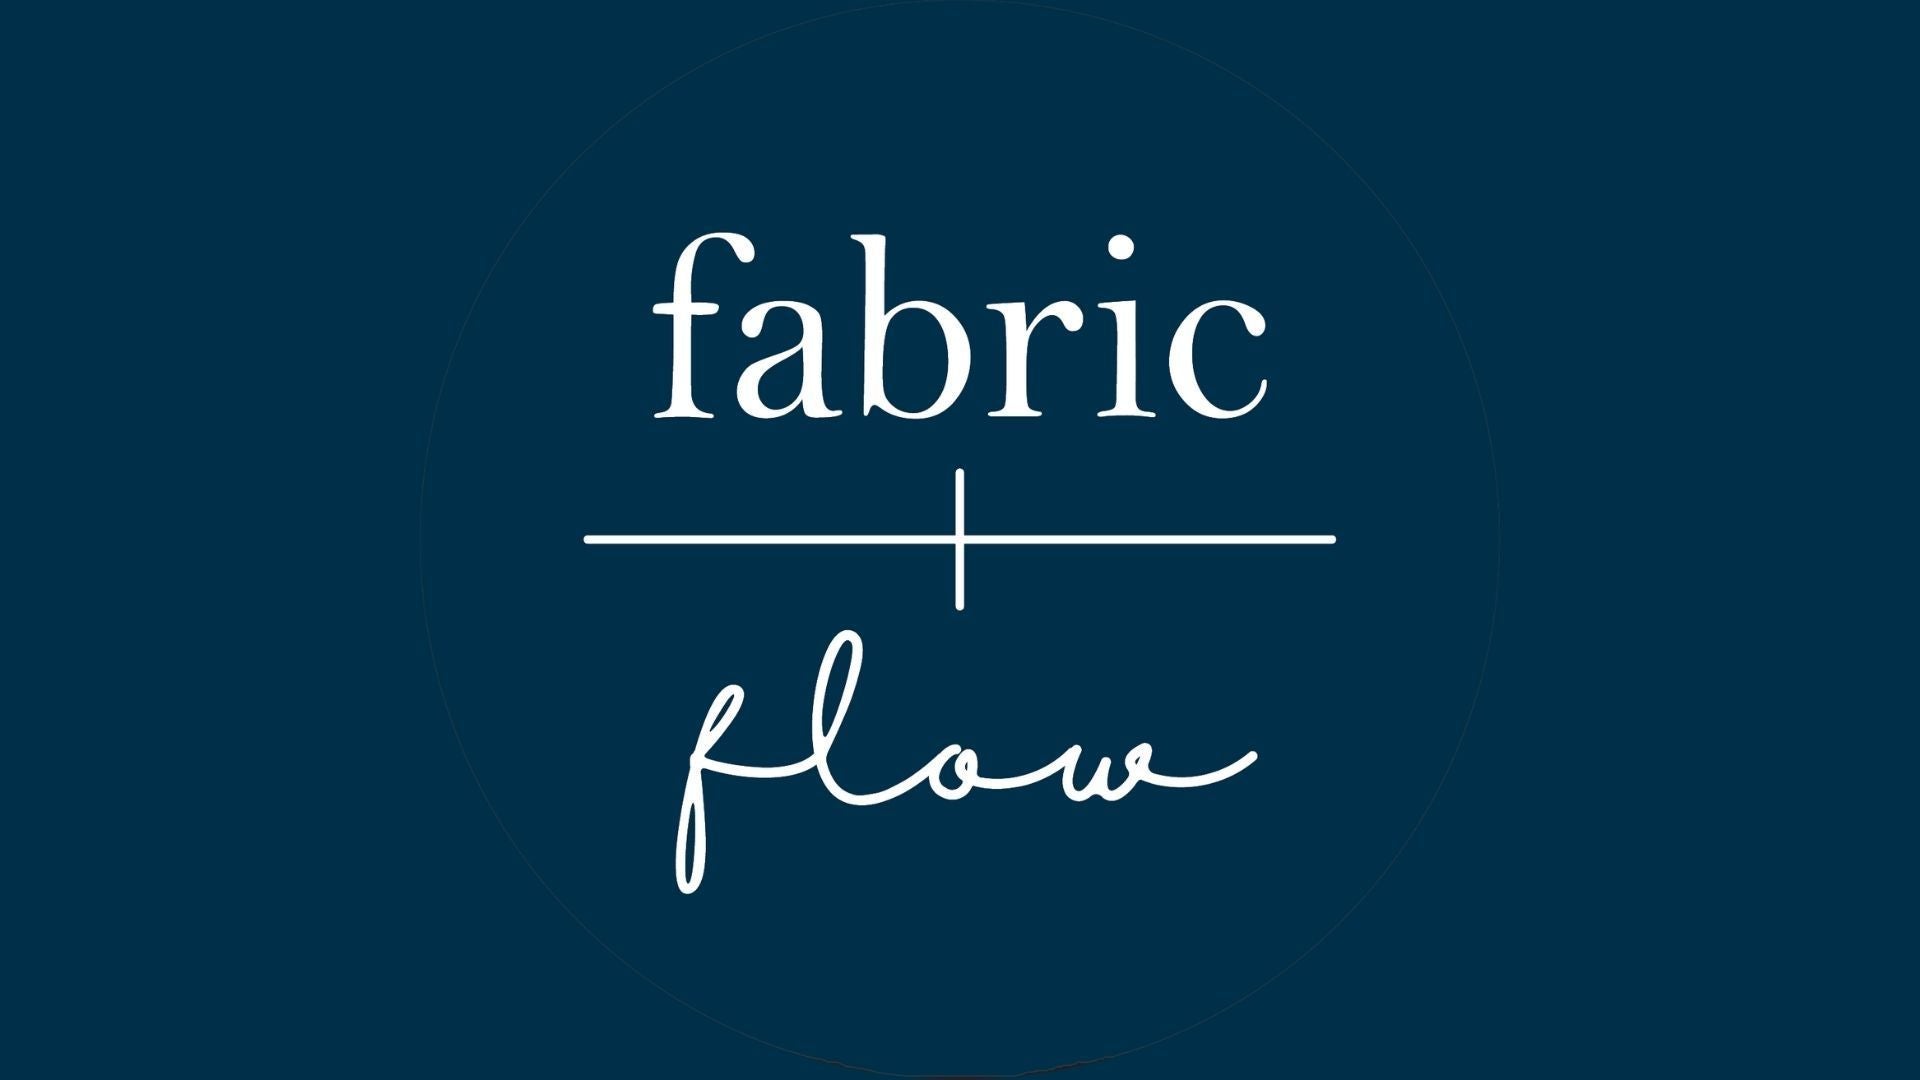 Learn How To Sew Elastic Directly To Fabric - The Creative Curator